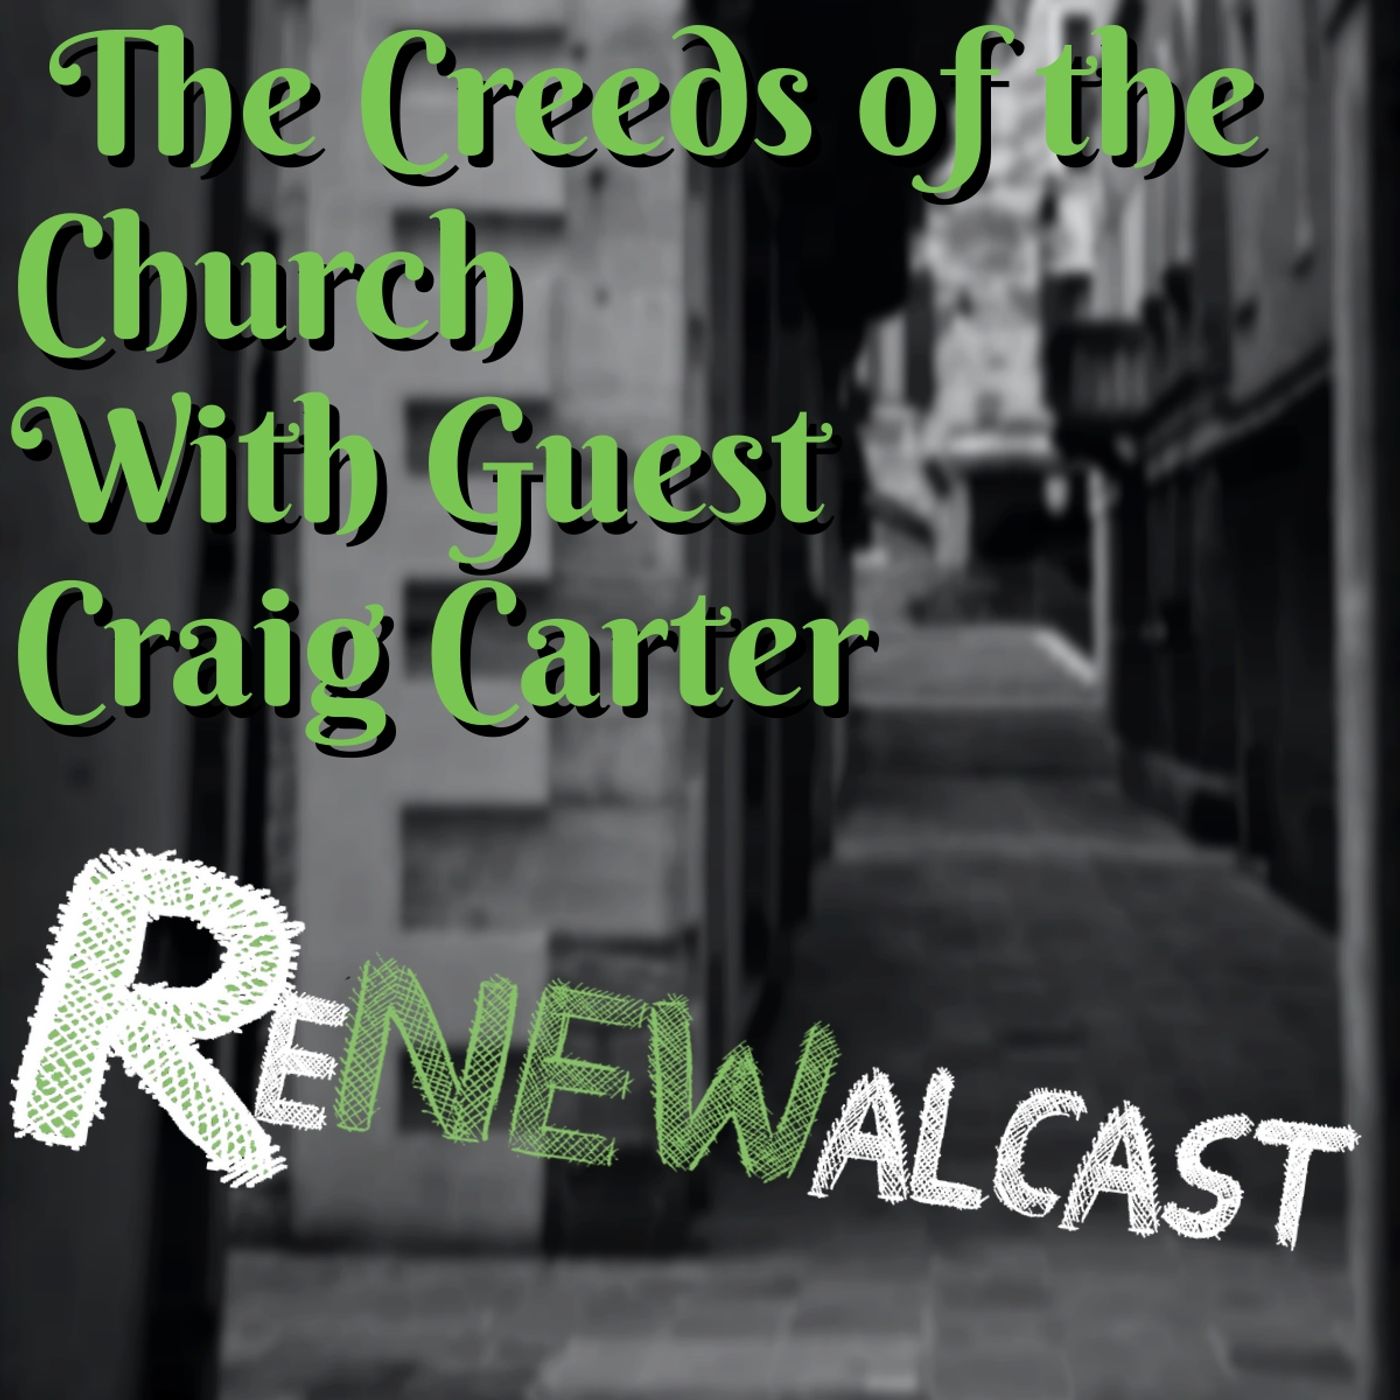 The Creeds of the Church with Guest Craig Carter